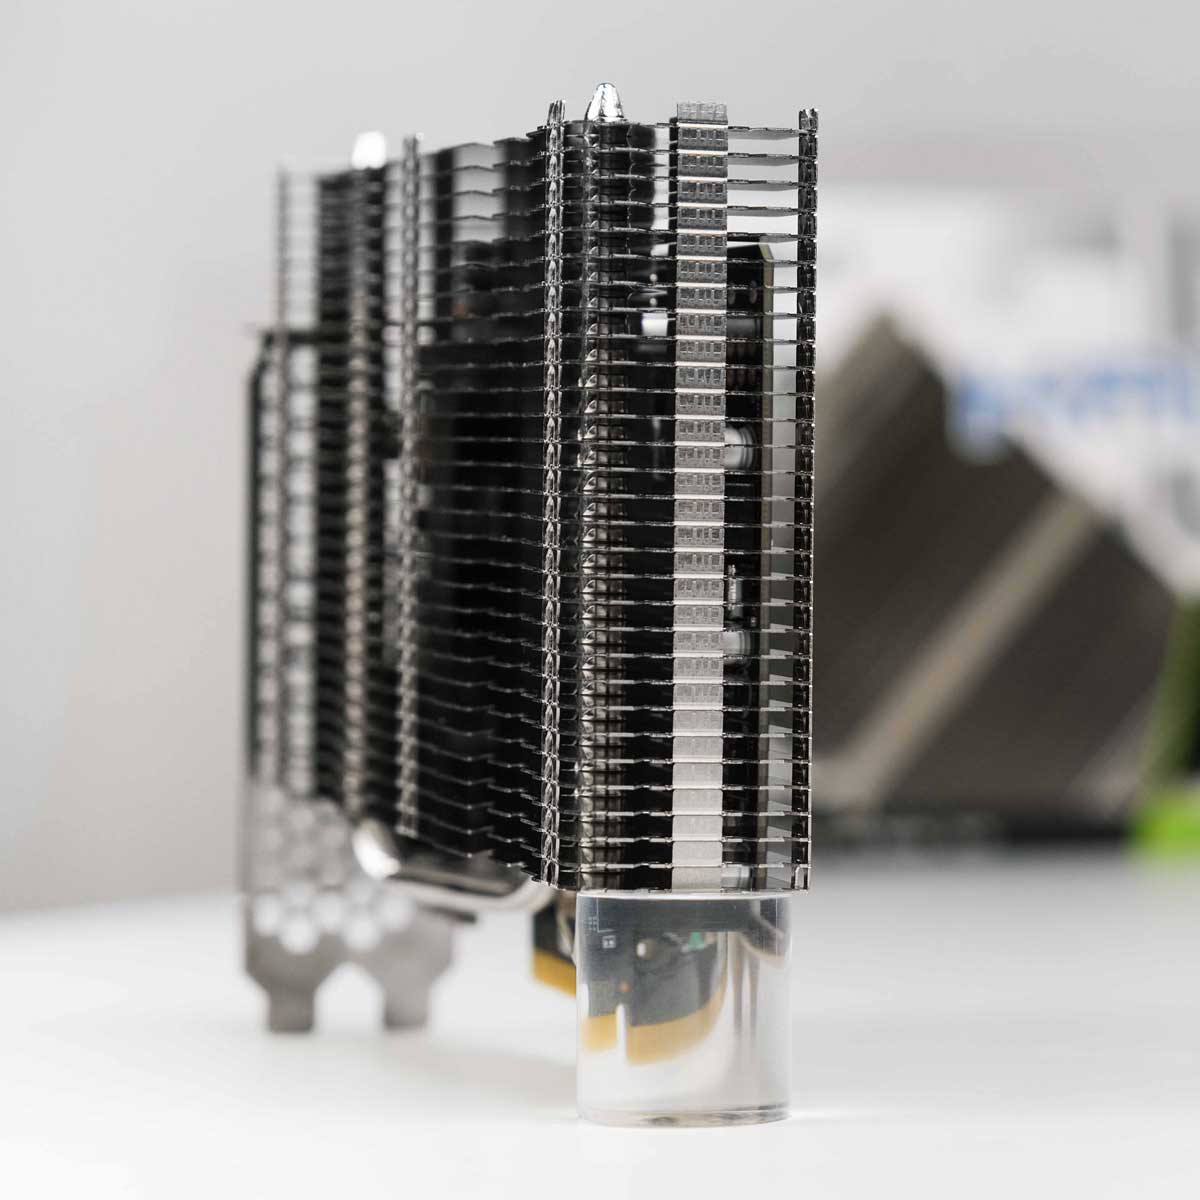 Check out the stunning details of #Palit GeForce RTX 3050 6GB KalmX. With passive-cooling design which guarantees Zero Noise, the #KalmX the ideal choice for creators who prioritize quietness in their workspace. Learn more: palit.com/palit/vgapro.p… #ZeroNoise #GPU